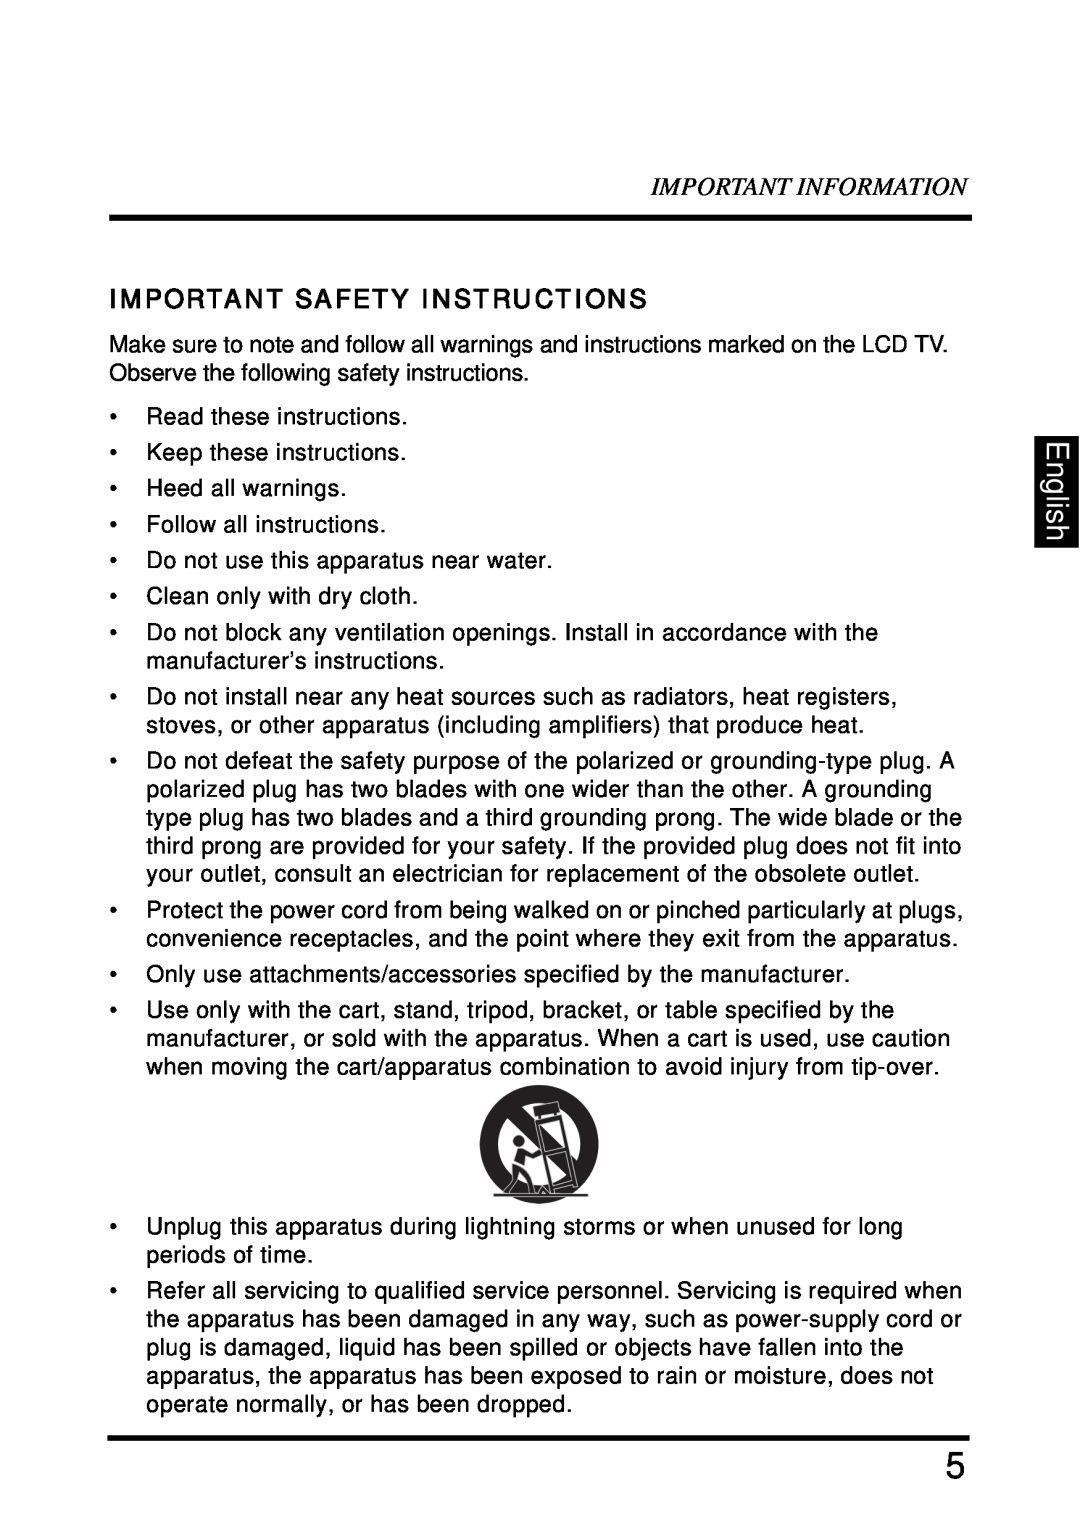 Westinghouse SK-32H640G user manual English, Important Information, Important Safety Instructions 